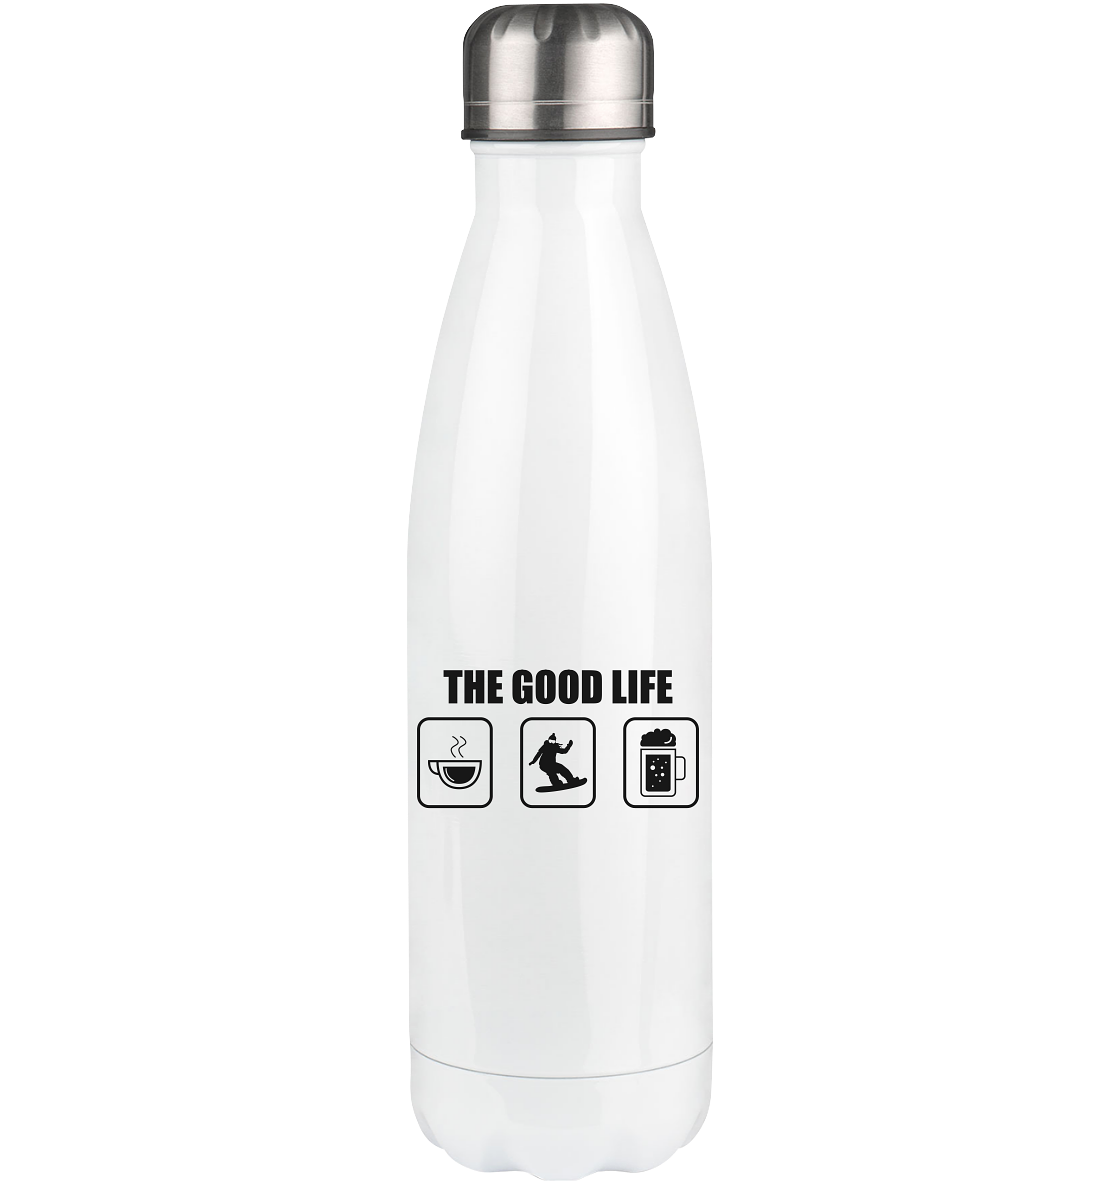 The Good Life 1 - Edelstahl Thermosflasche snowboarden 500ml